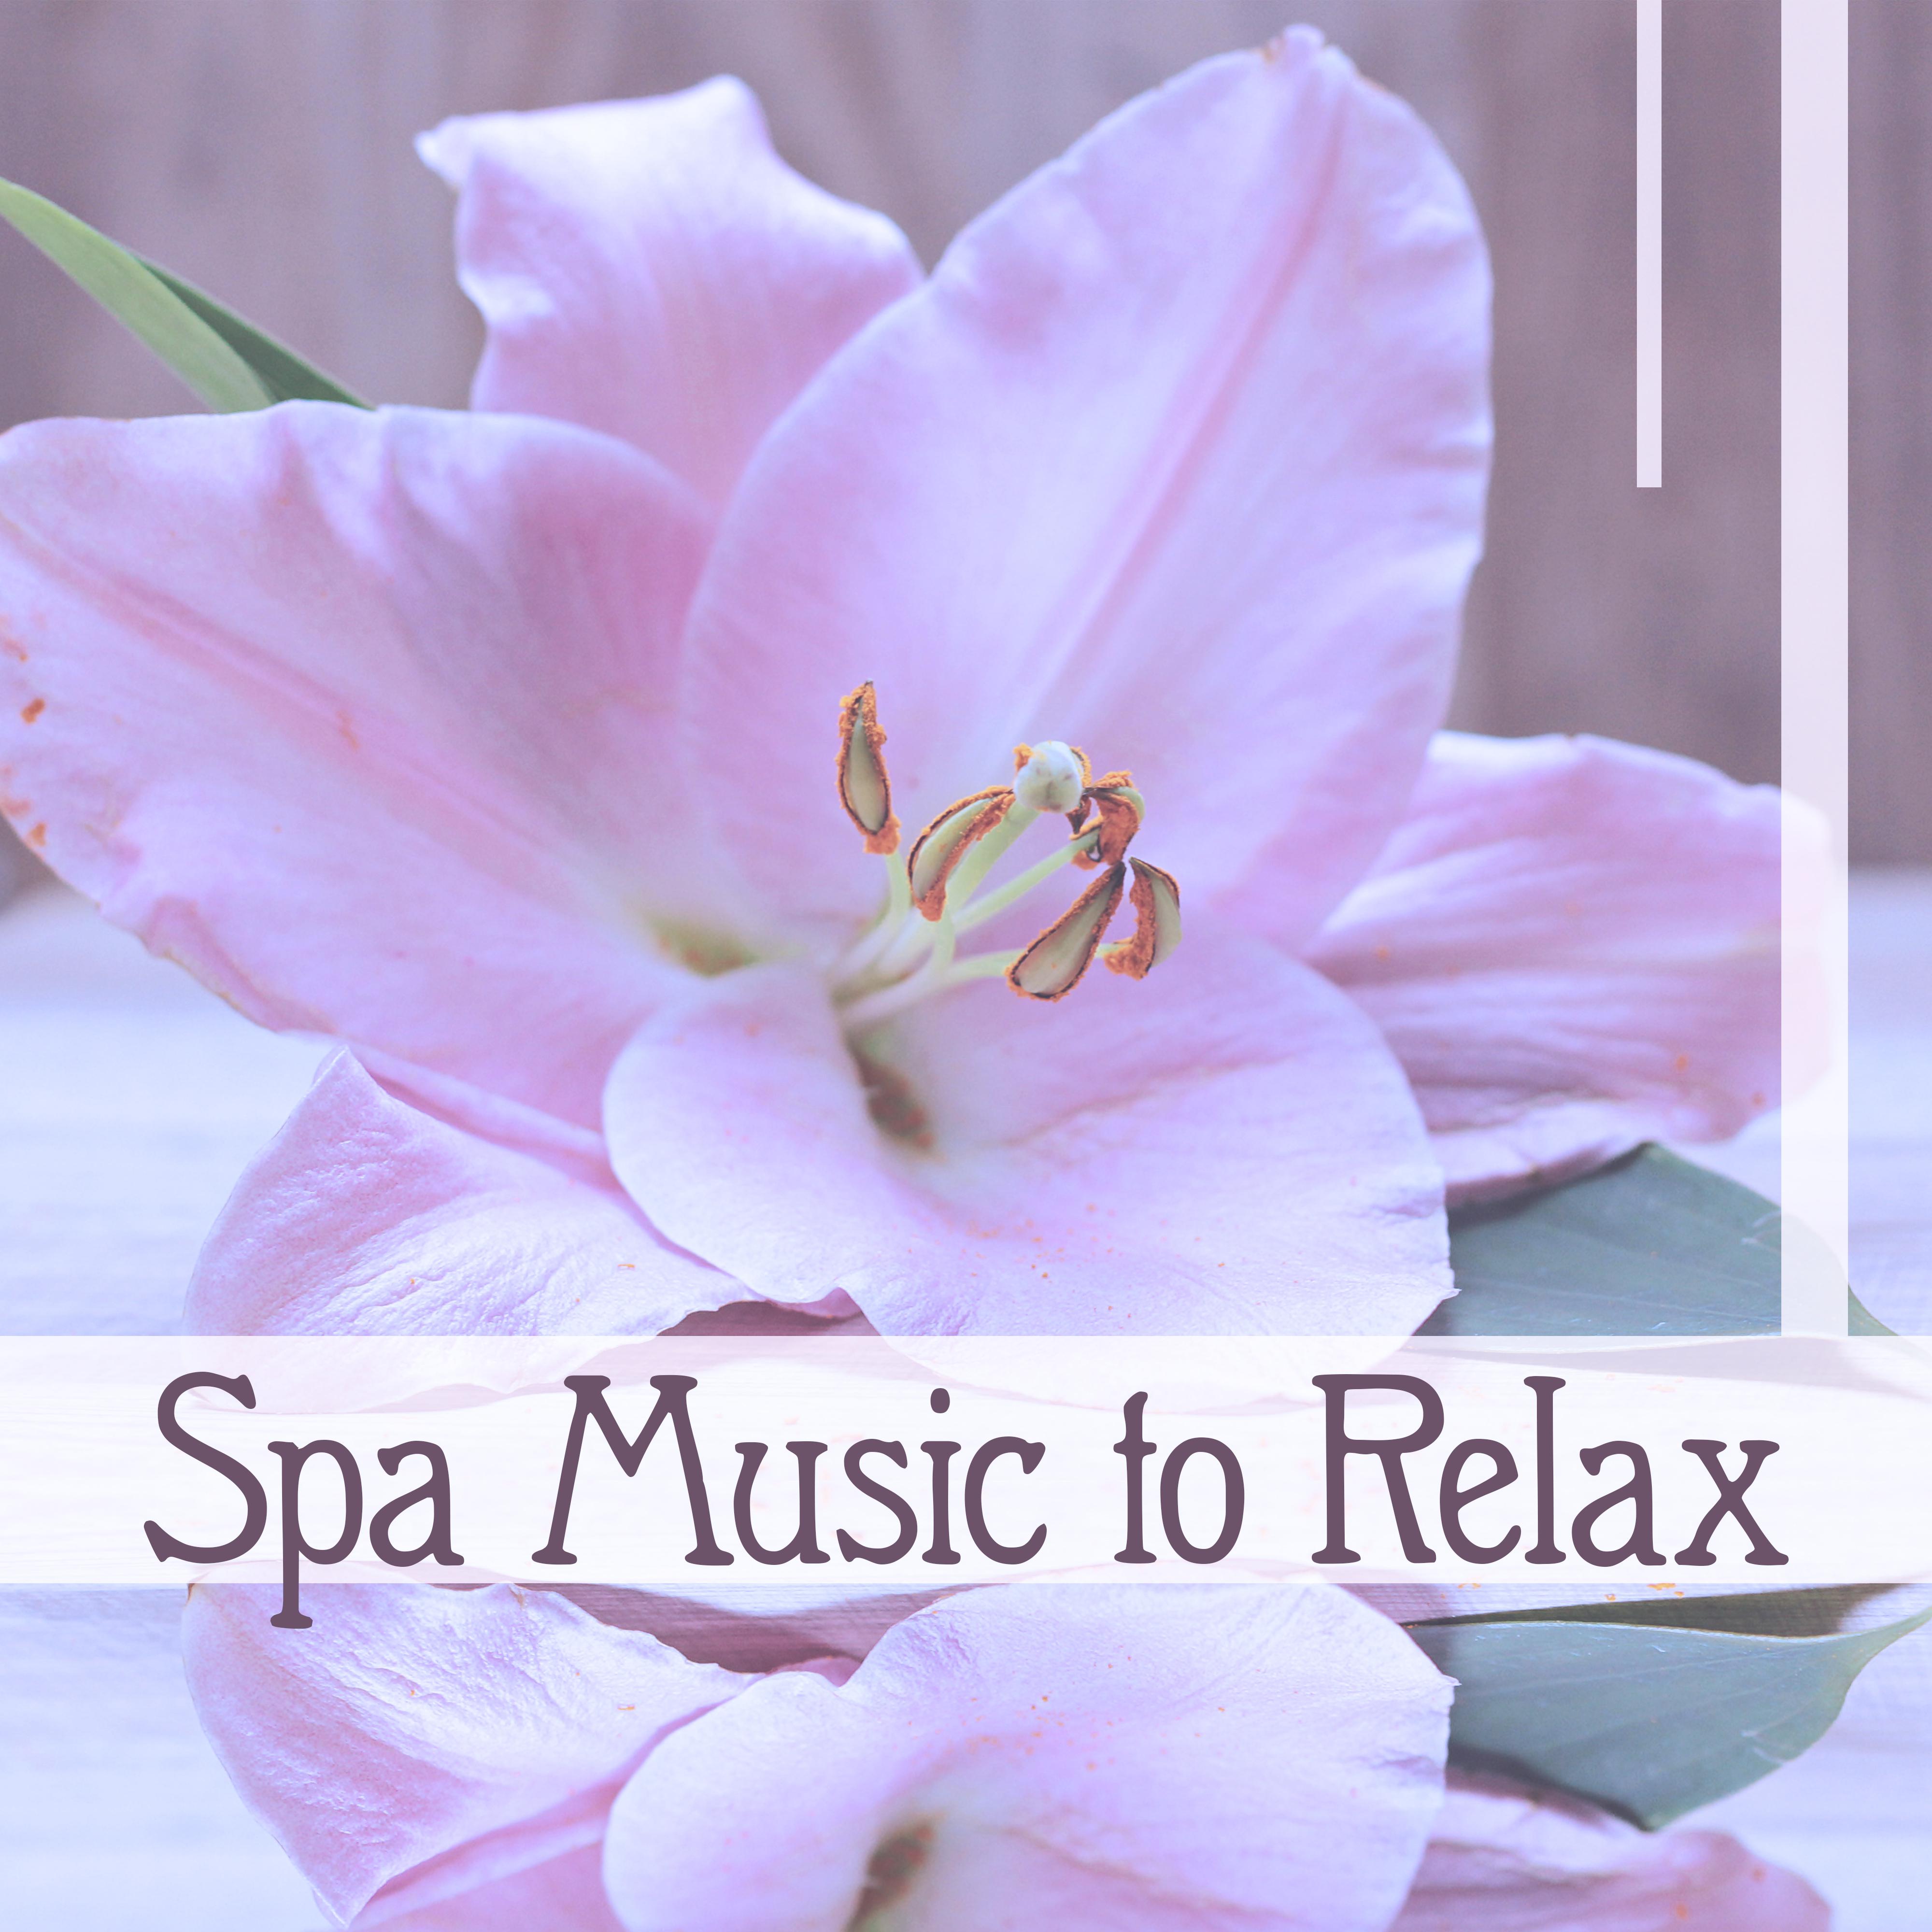 Spa Music to Relax – Soft Sounds to Massage, Relaxing New Age Music, Nature Healing, Sensual Waves